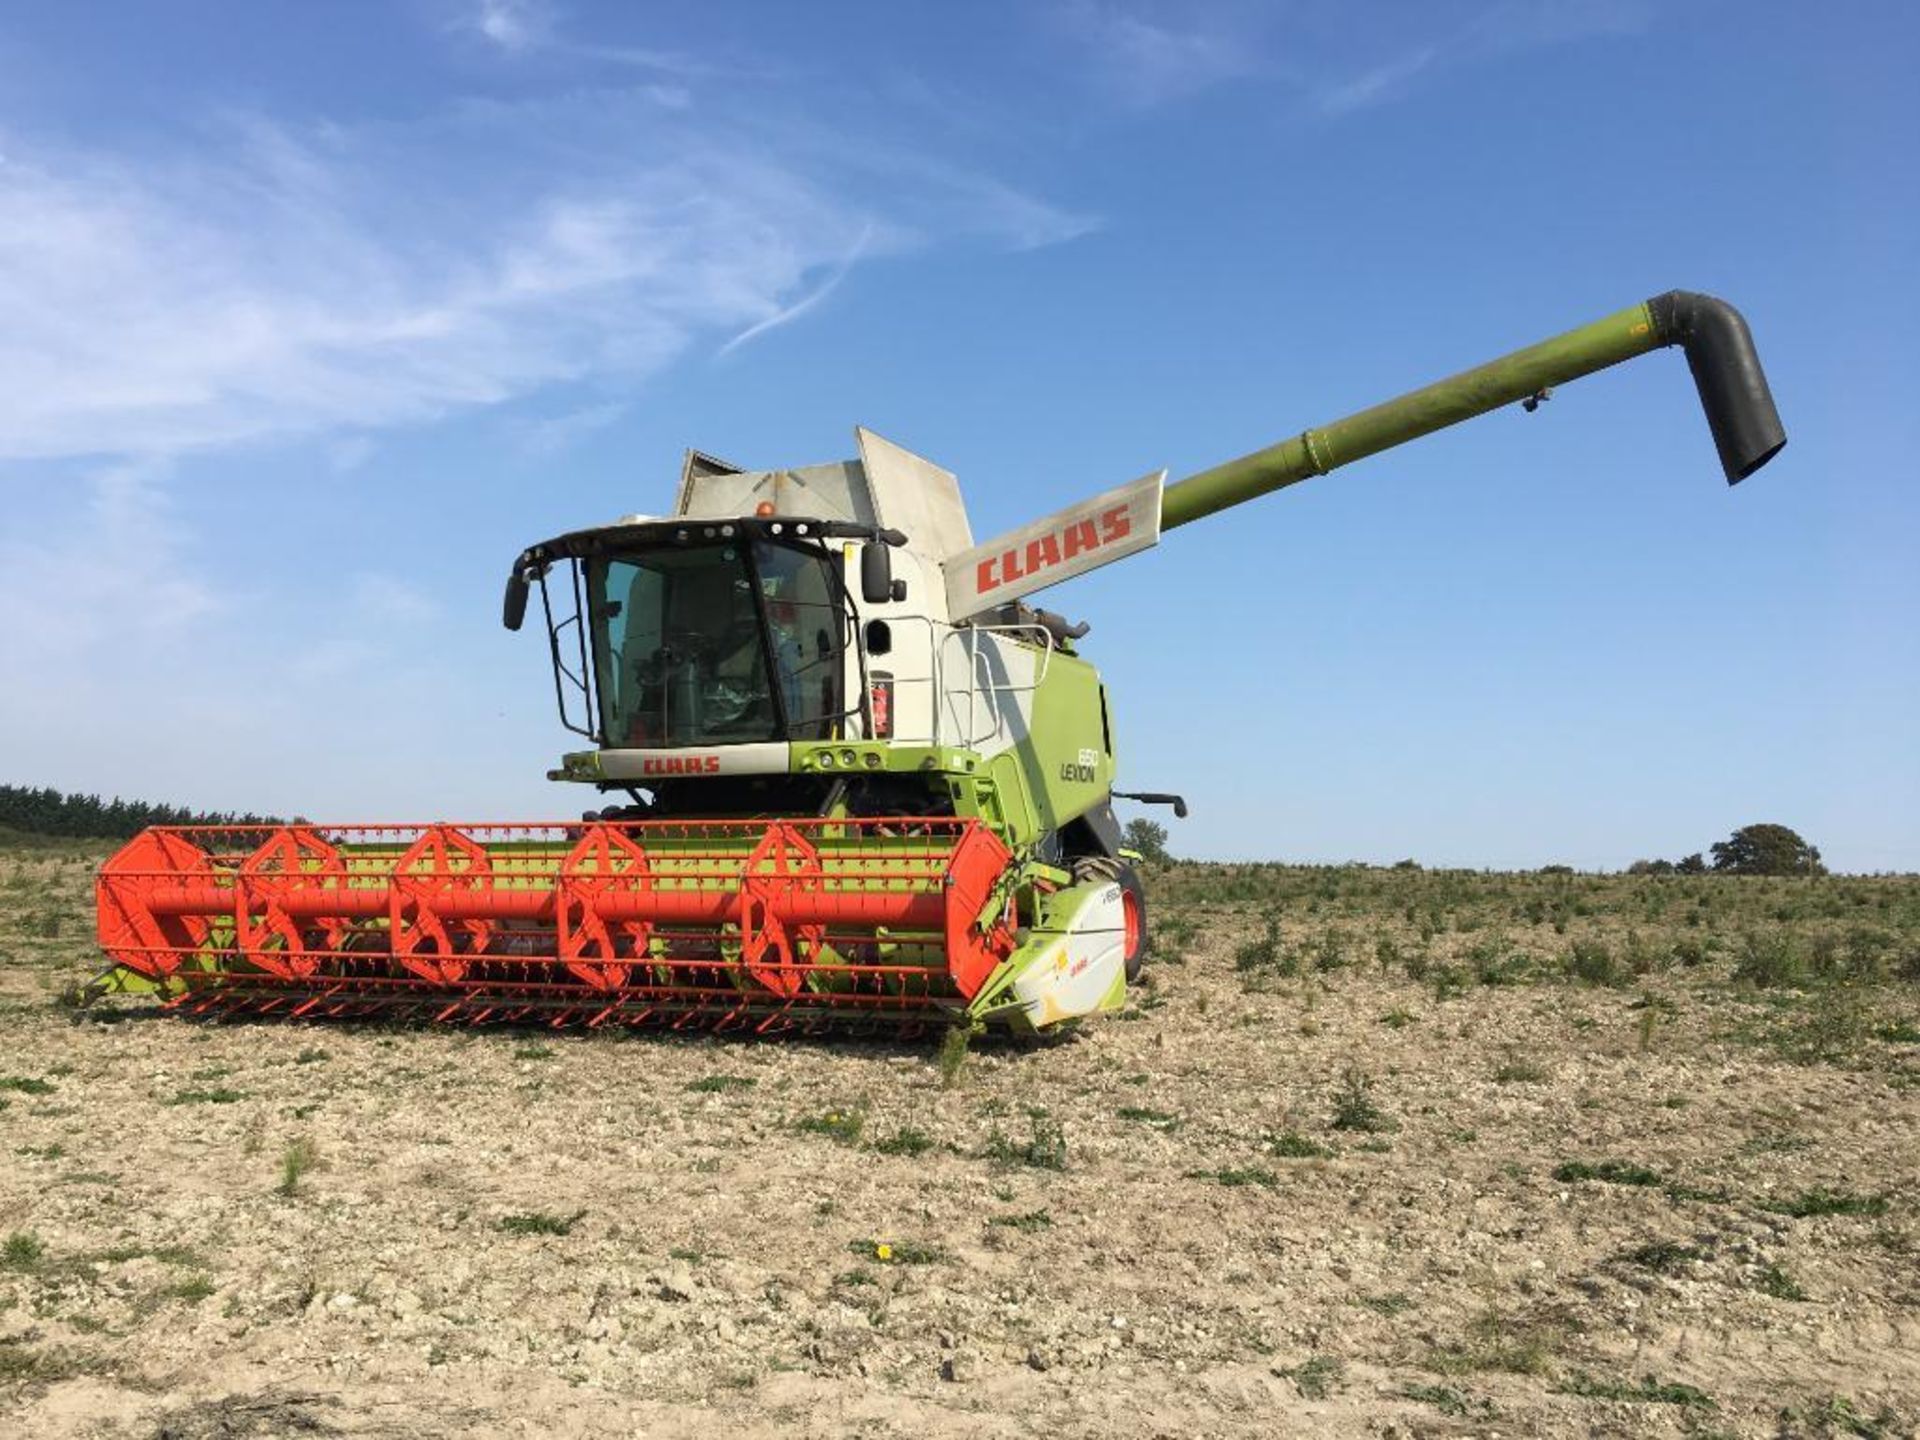 2014 Claas Lexion 650 combine harvester with V660 (22ft) header and header trolley with side knife a - Image 16 of 26